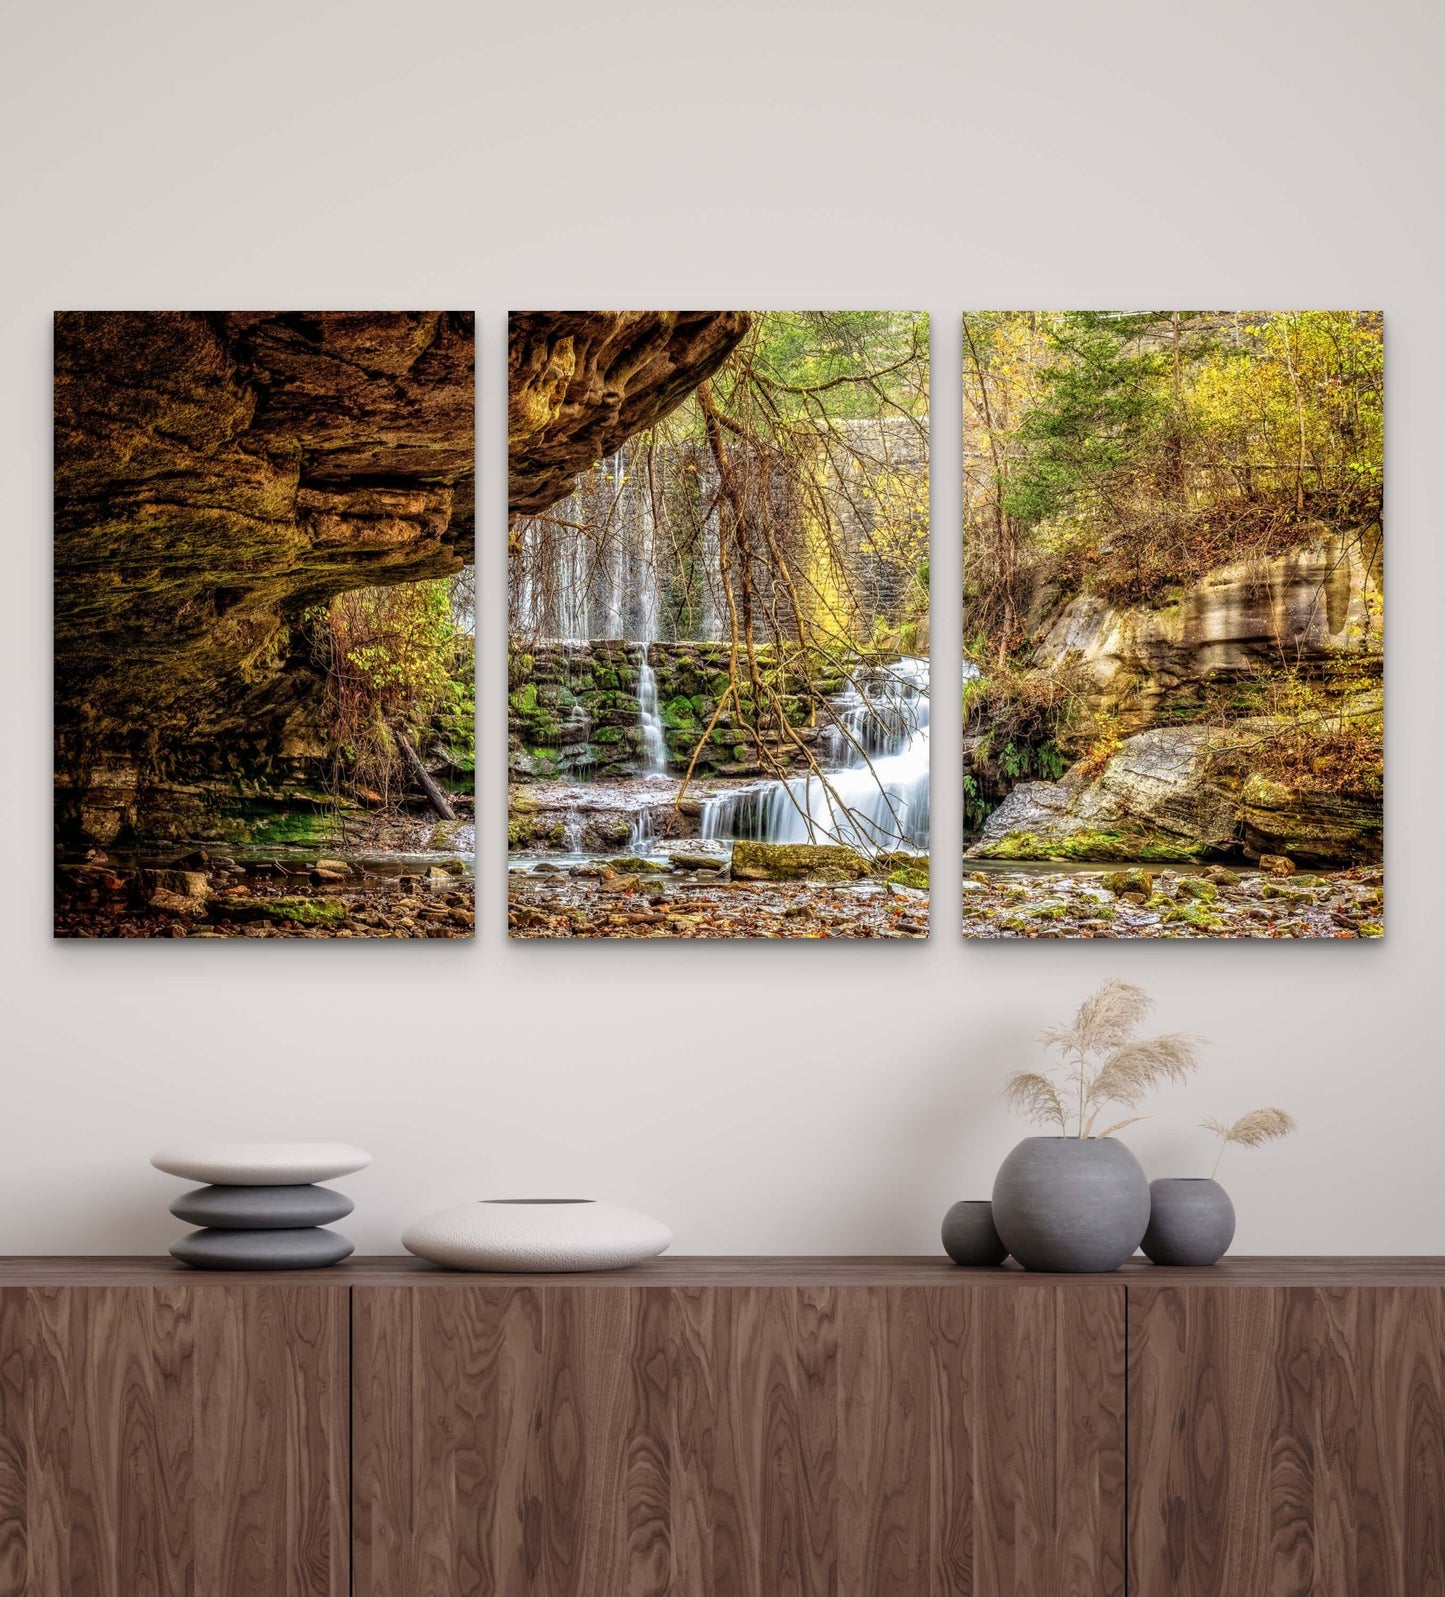 Wimberley Puzzle Company Posters, Prints, & Visual Artwork 16x24" Triptych Mirror Lake Waterfall, Wooden Art Prints